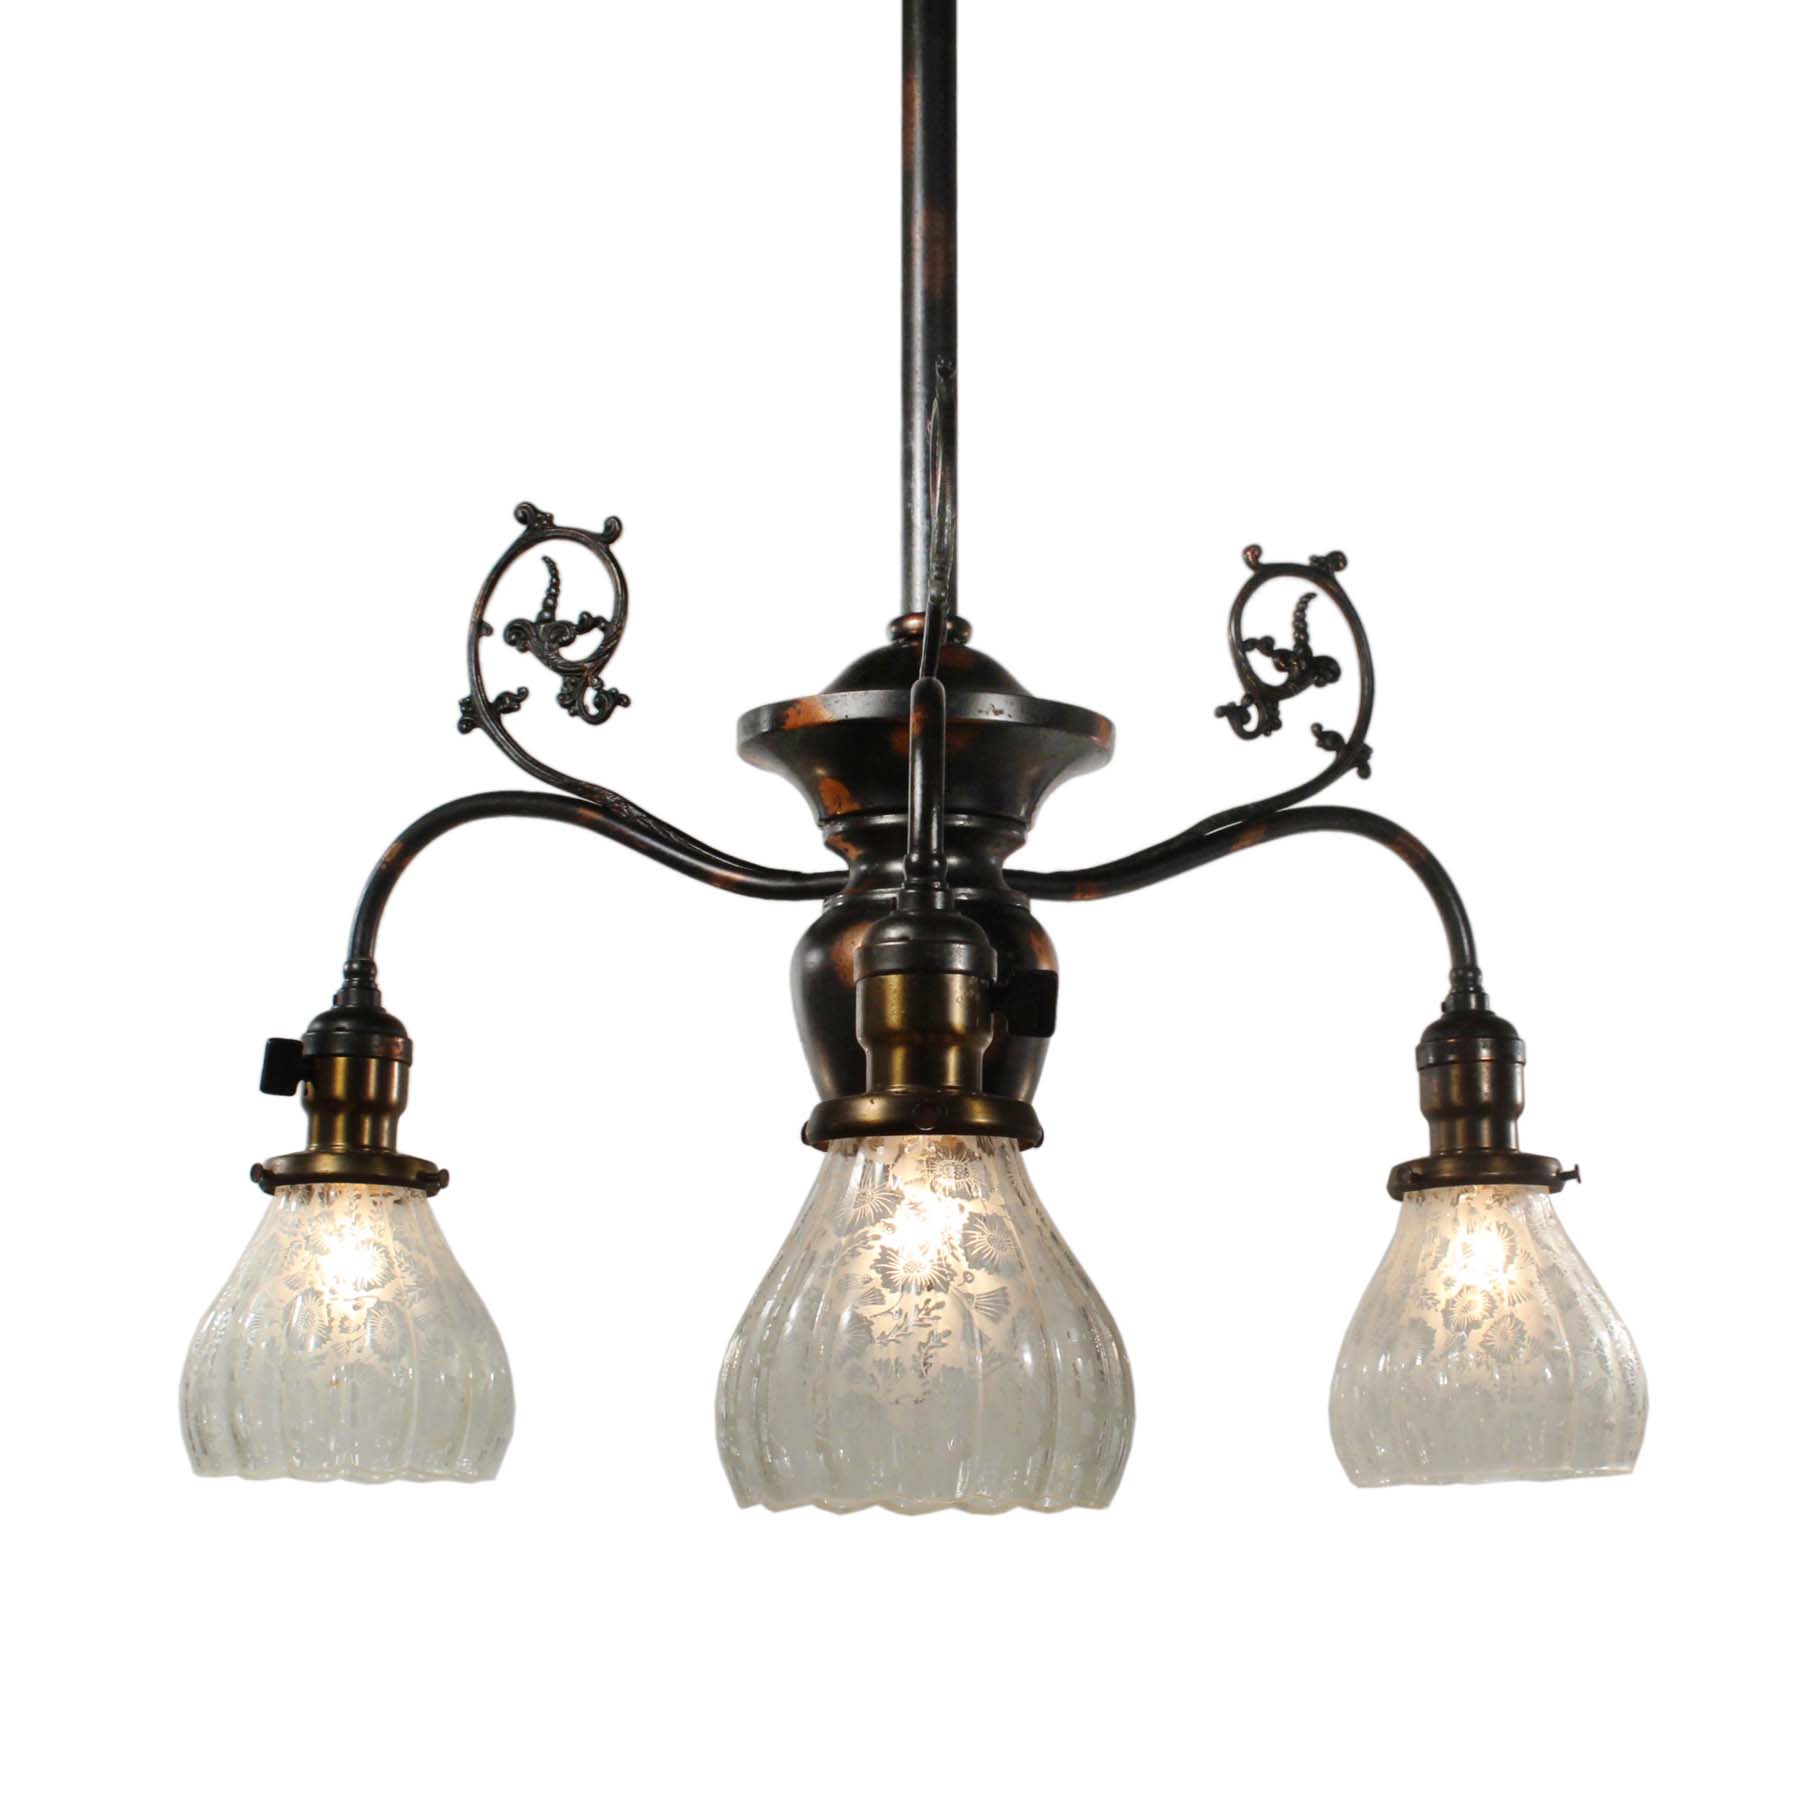 SOLD Antique Gas Chandelier with Original Glass Shades, c. 1880-0